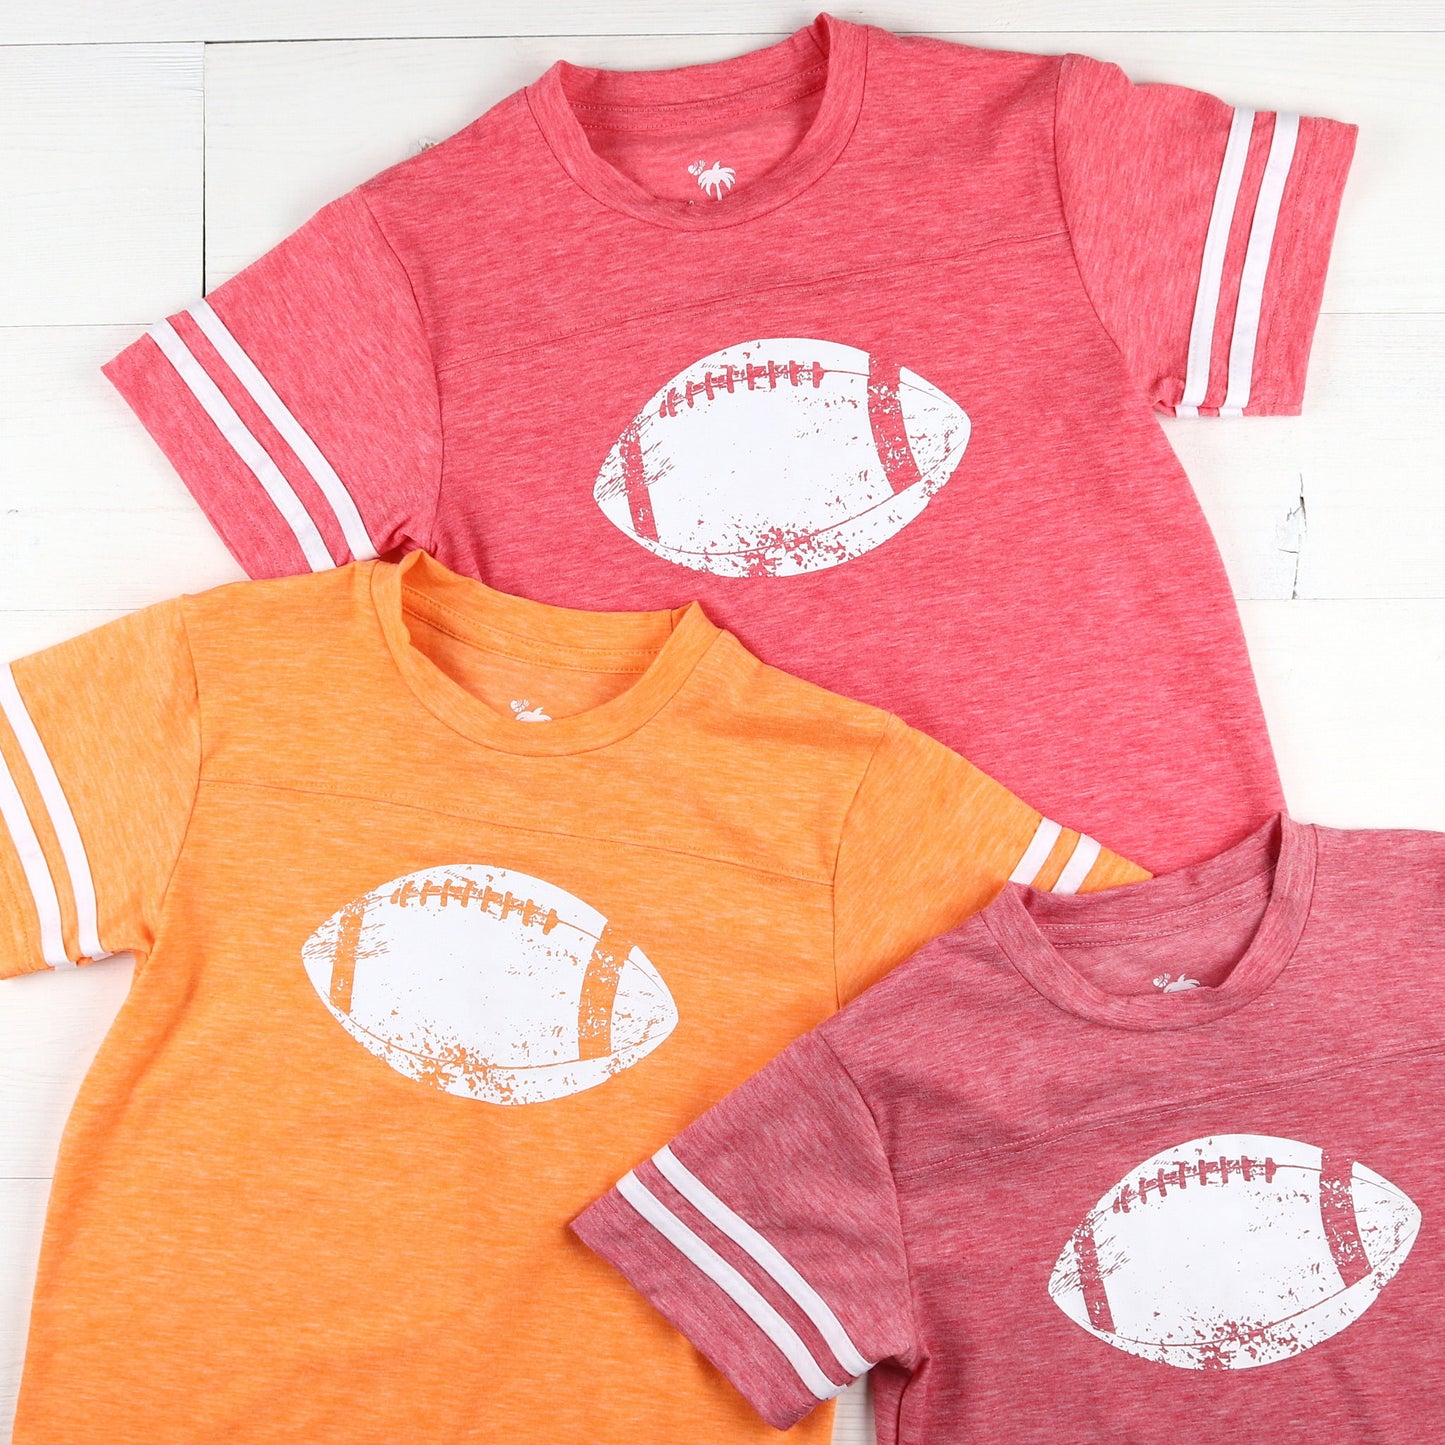 Red Football Jersey Tee